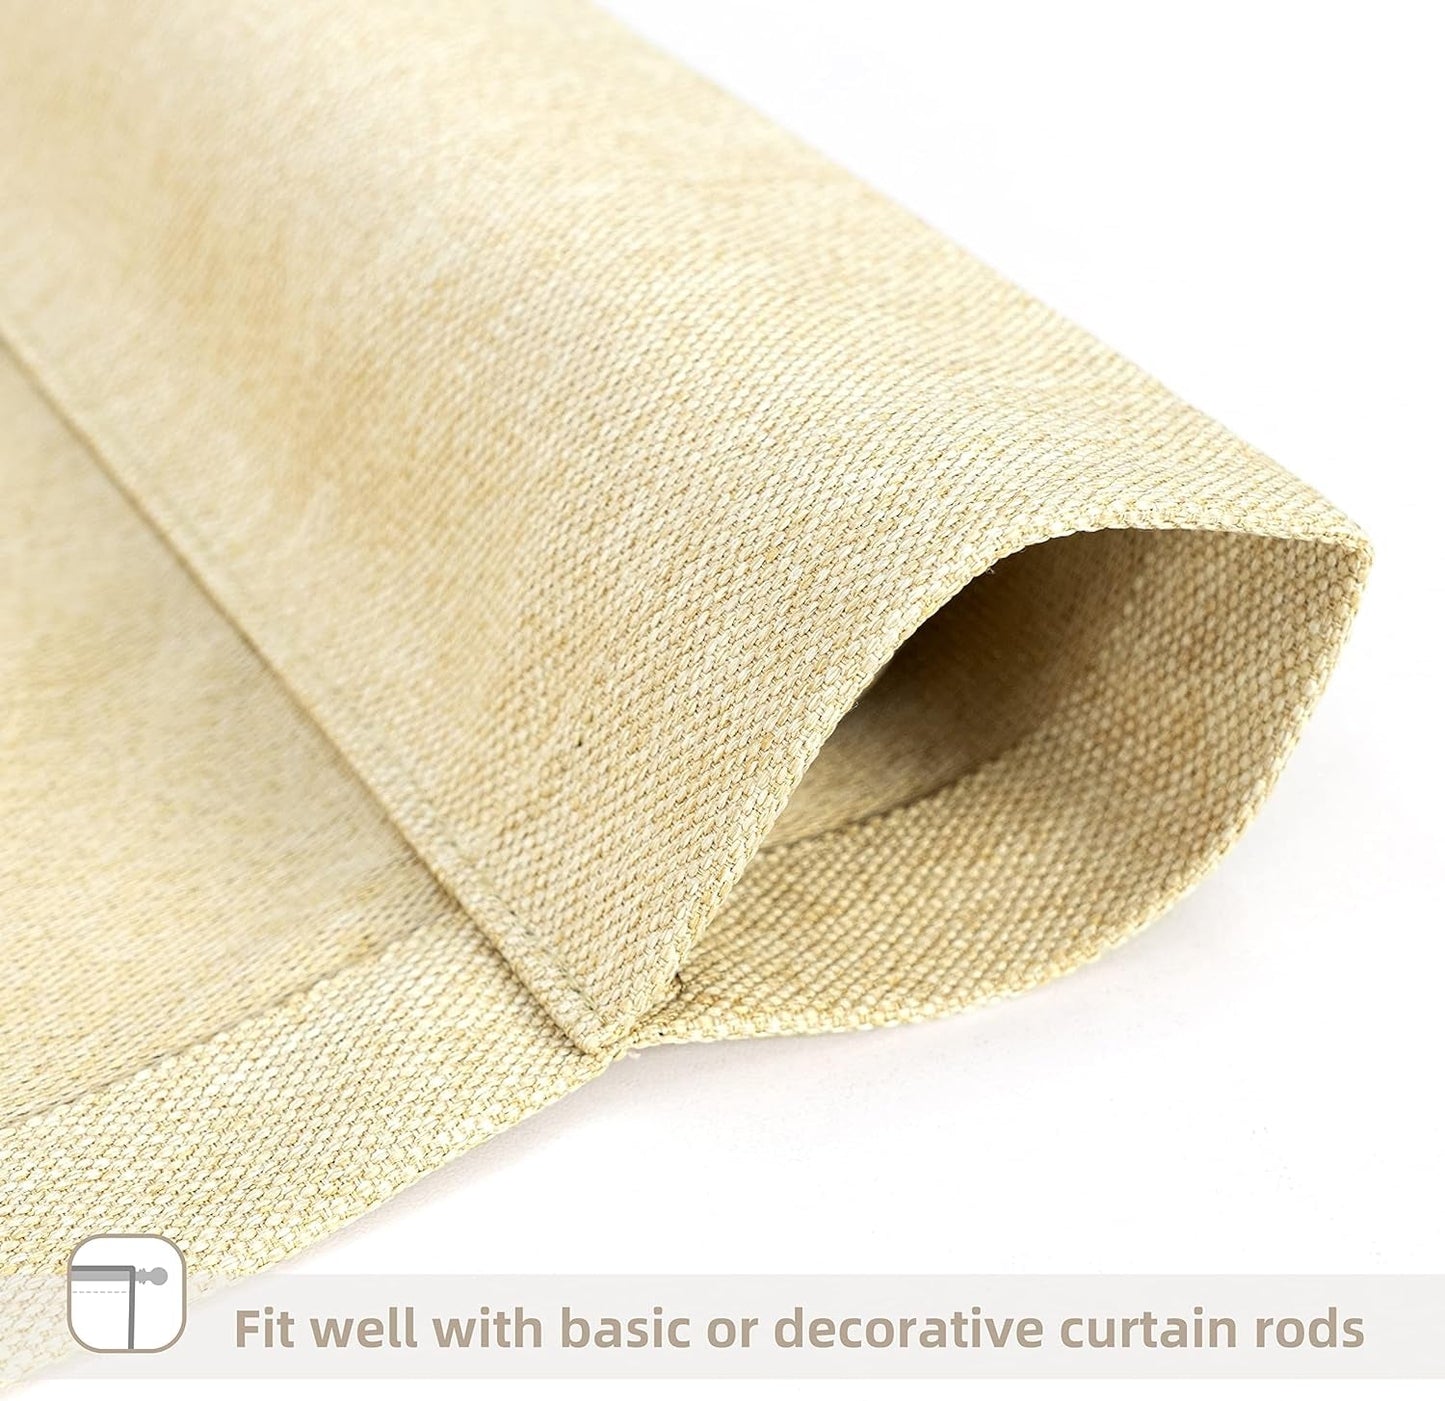 Driftaway Faux Linen Textured Solid Color Blackout Tie up Curtain for Kitchen Decorative Adjustable Balloon Rod Pocket Window Linen Curtains for Small Window 39 Inch by 55 Inch Beige